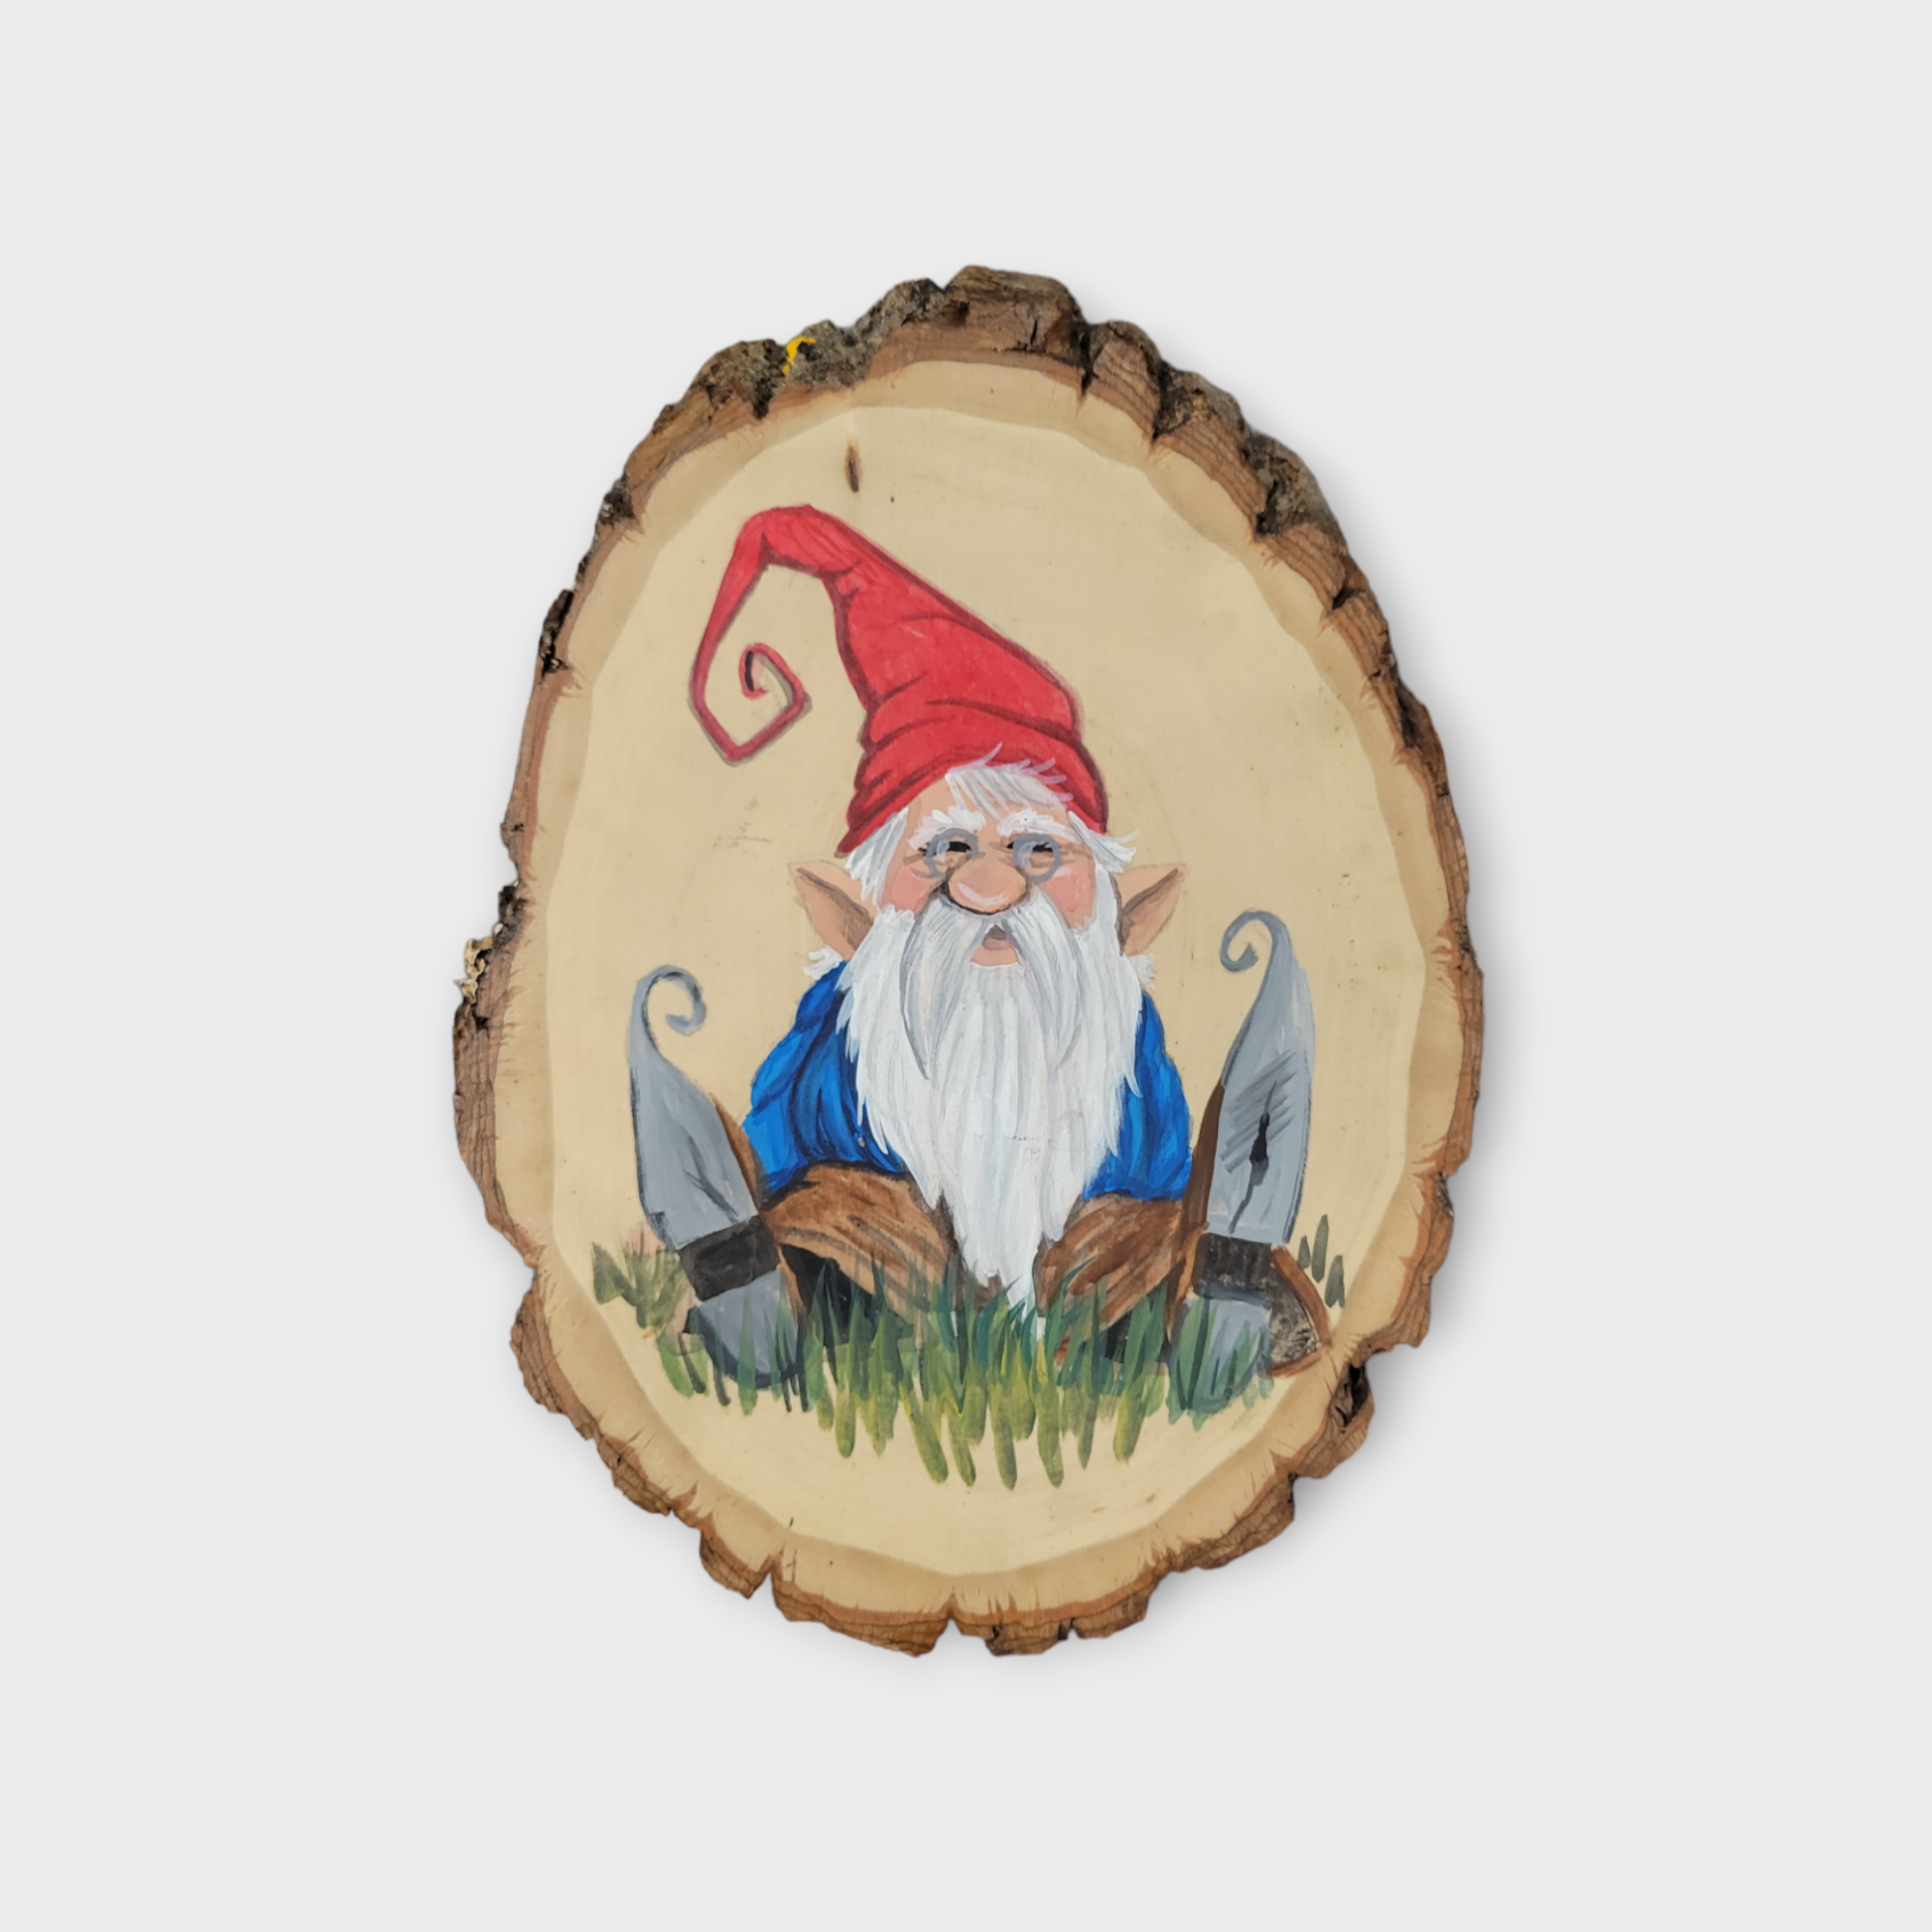 Artwork: Painted Gnome on Wood